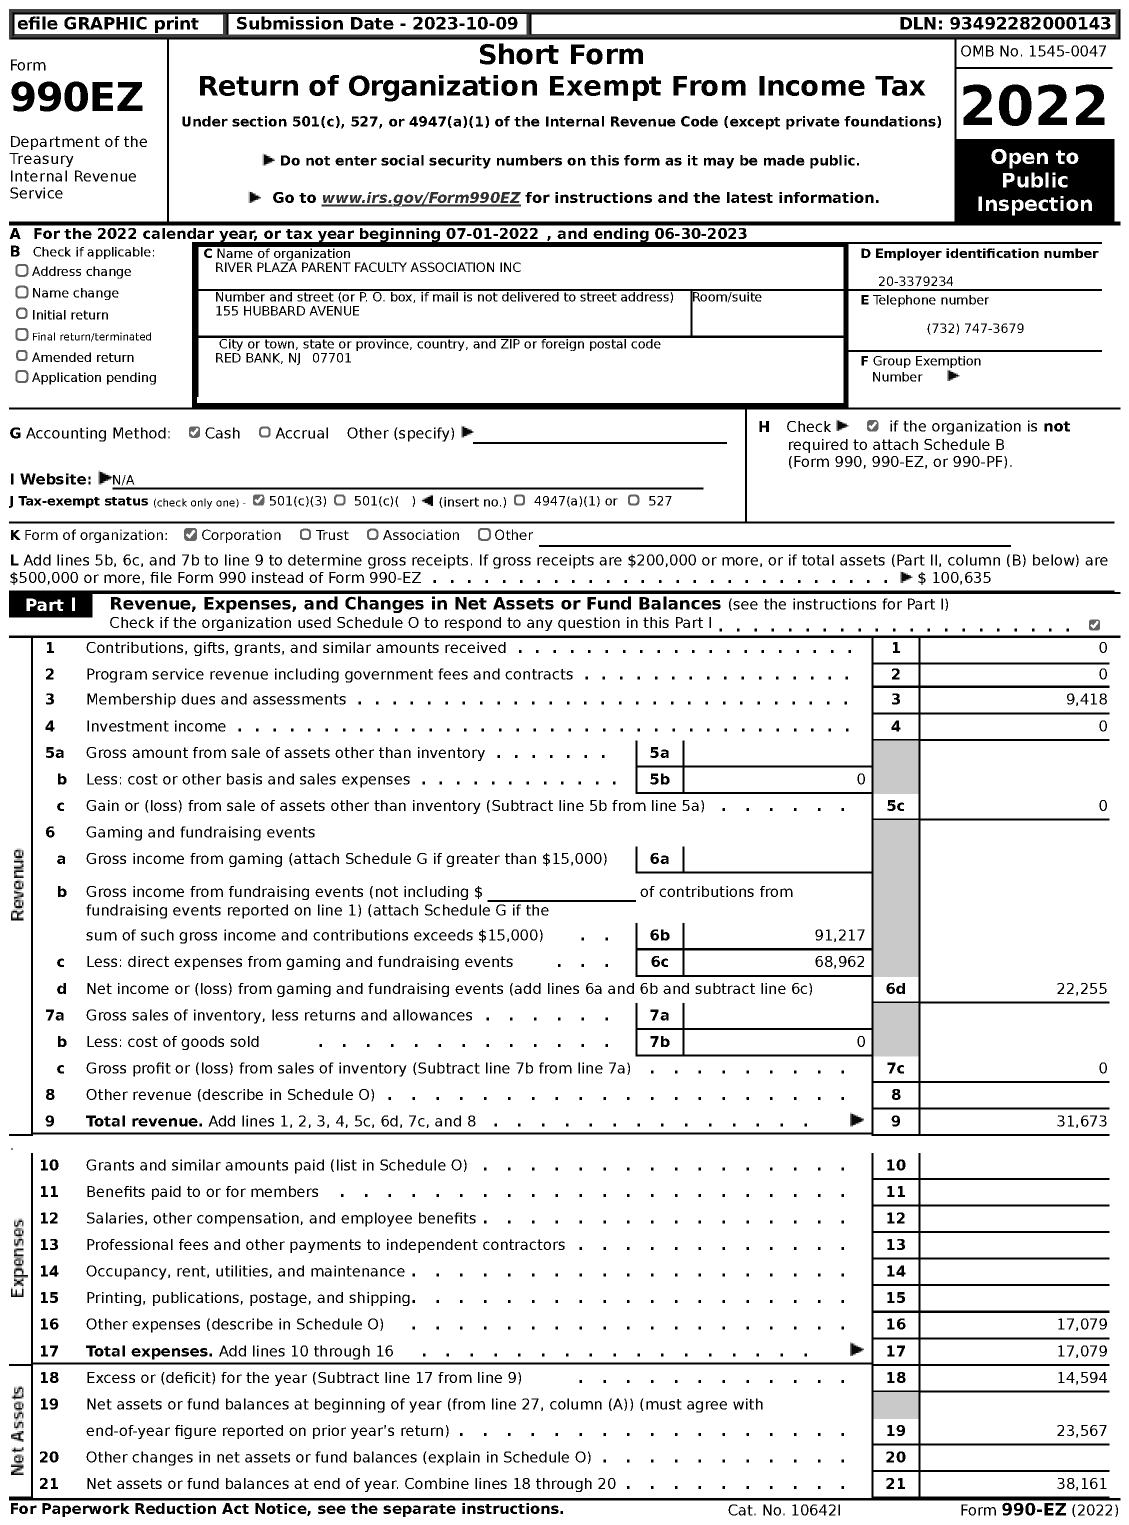 Image of first page of 2022 Form 990EZ for River Plaza Parent Faculty Association